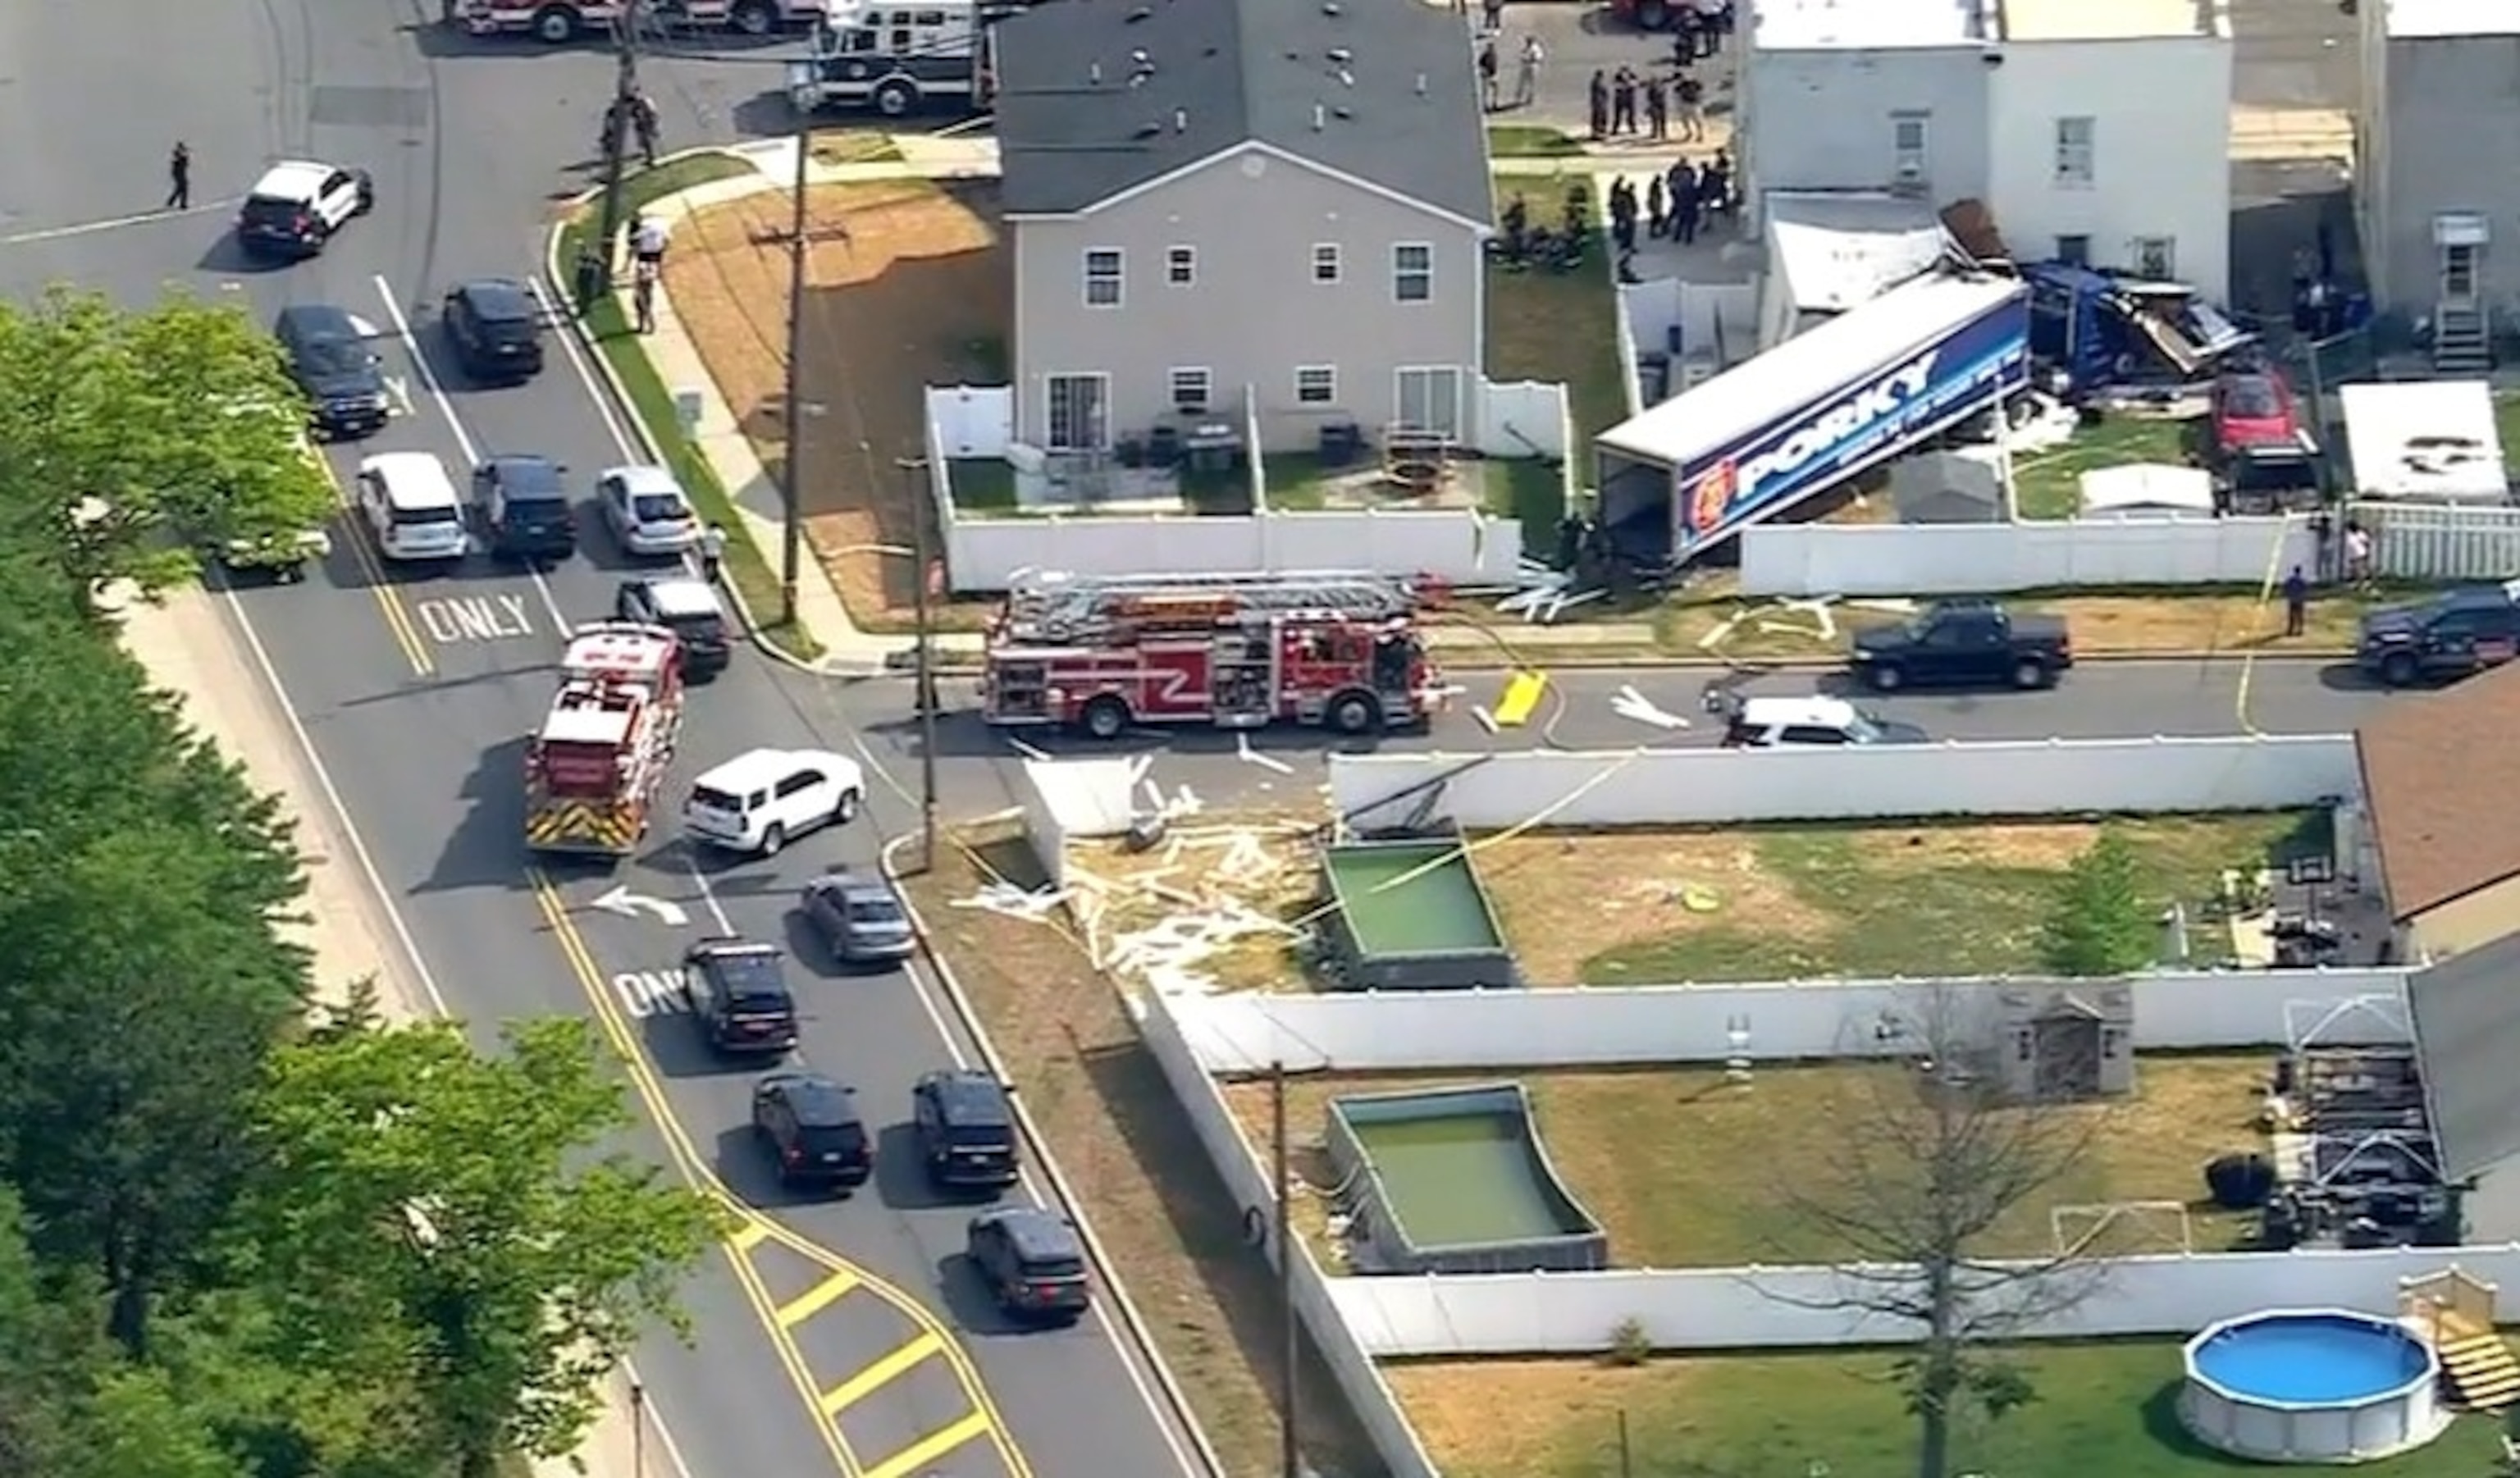 PHOTO: An accident occurred when a tractor trailer crashed into a house on Chrome Avenue near Industrial Highway/Middlesex Ave in NJ. The driver reportedly experienced a medical issue before the collision.